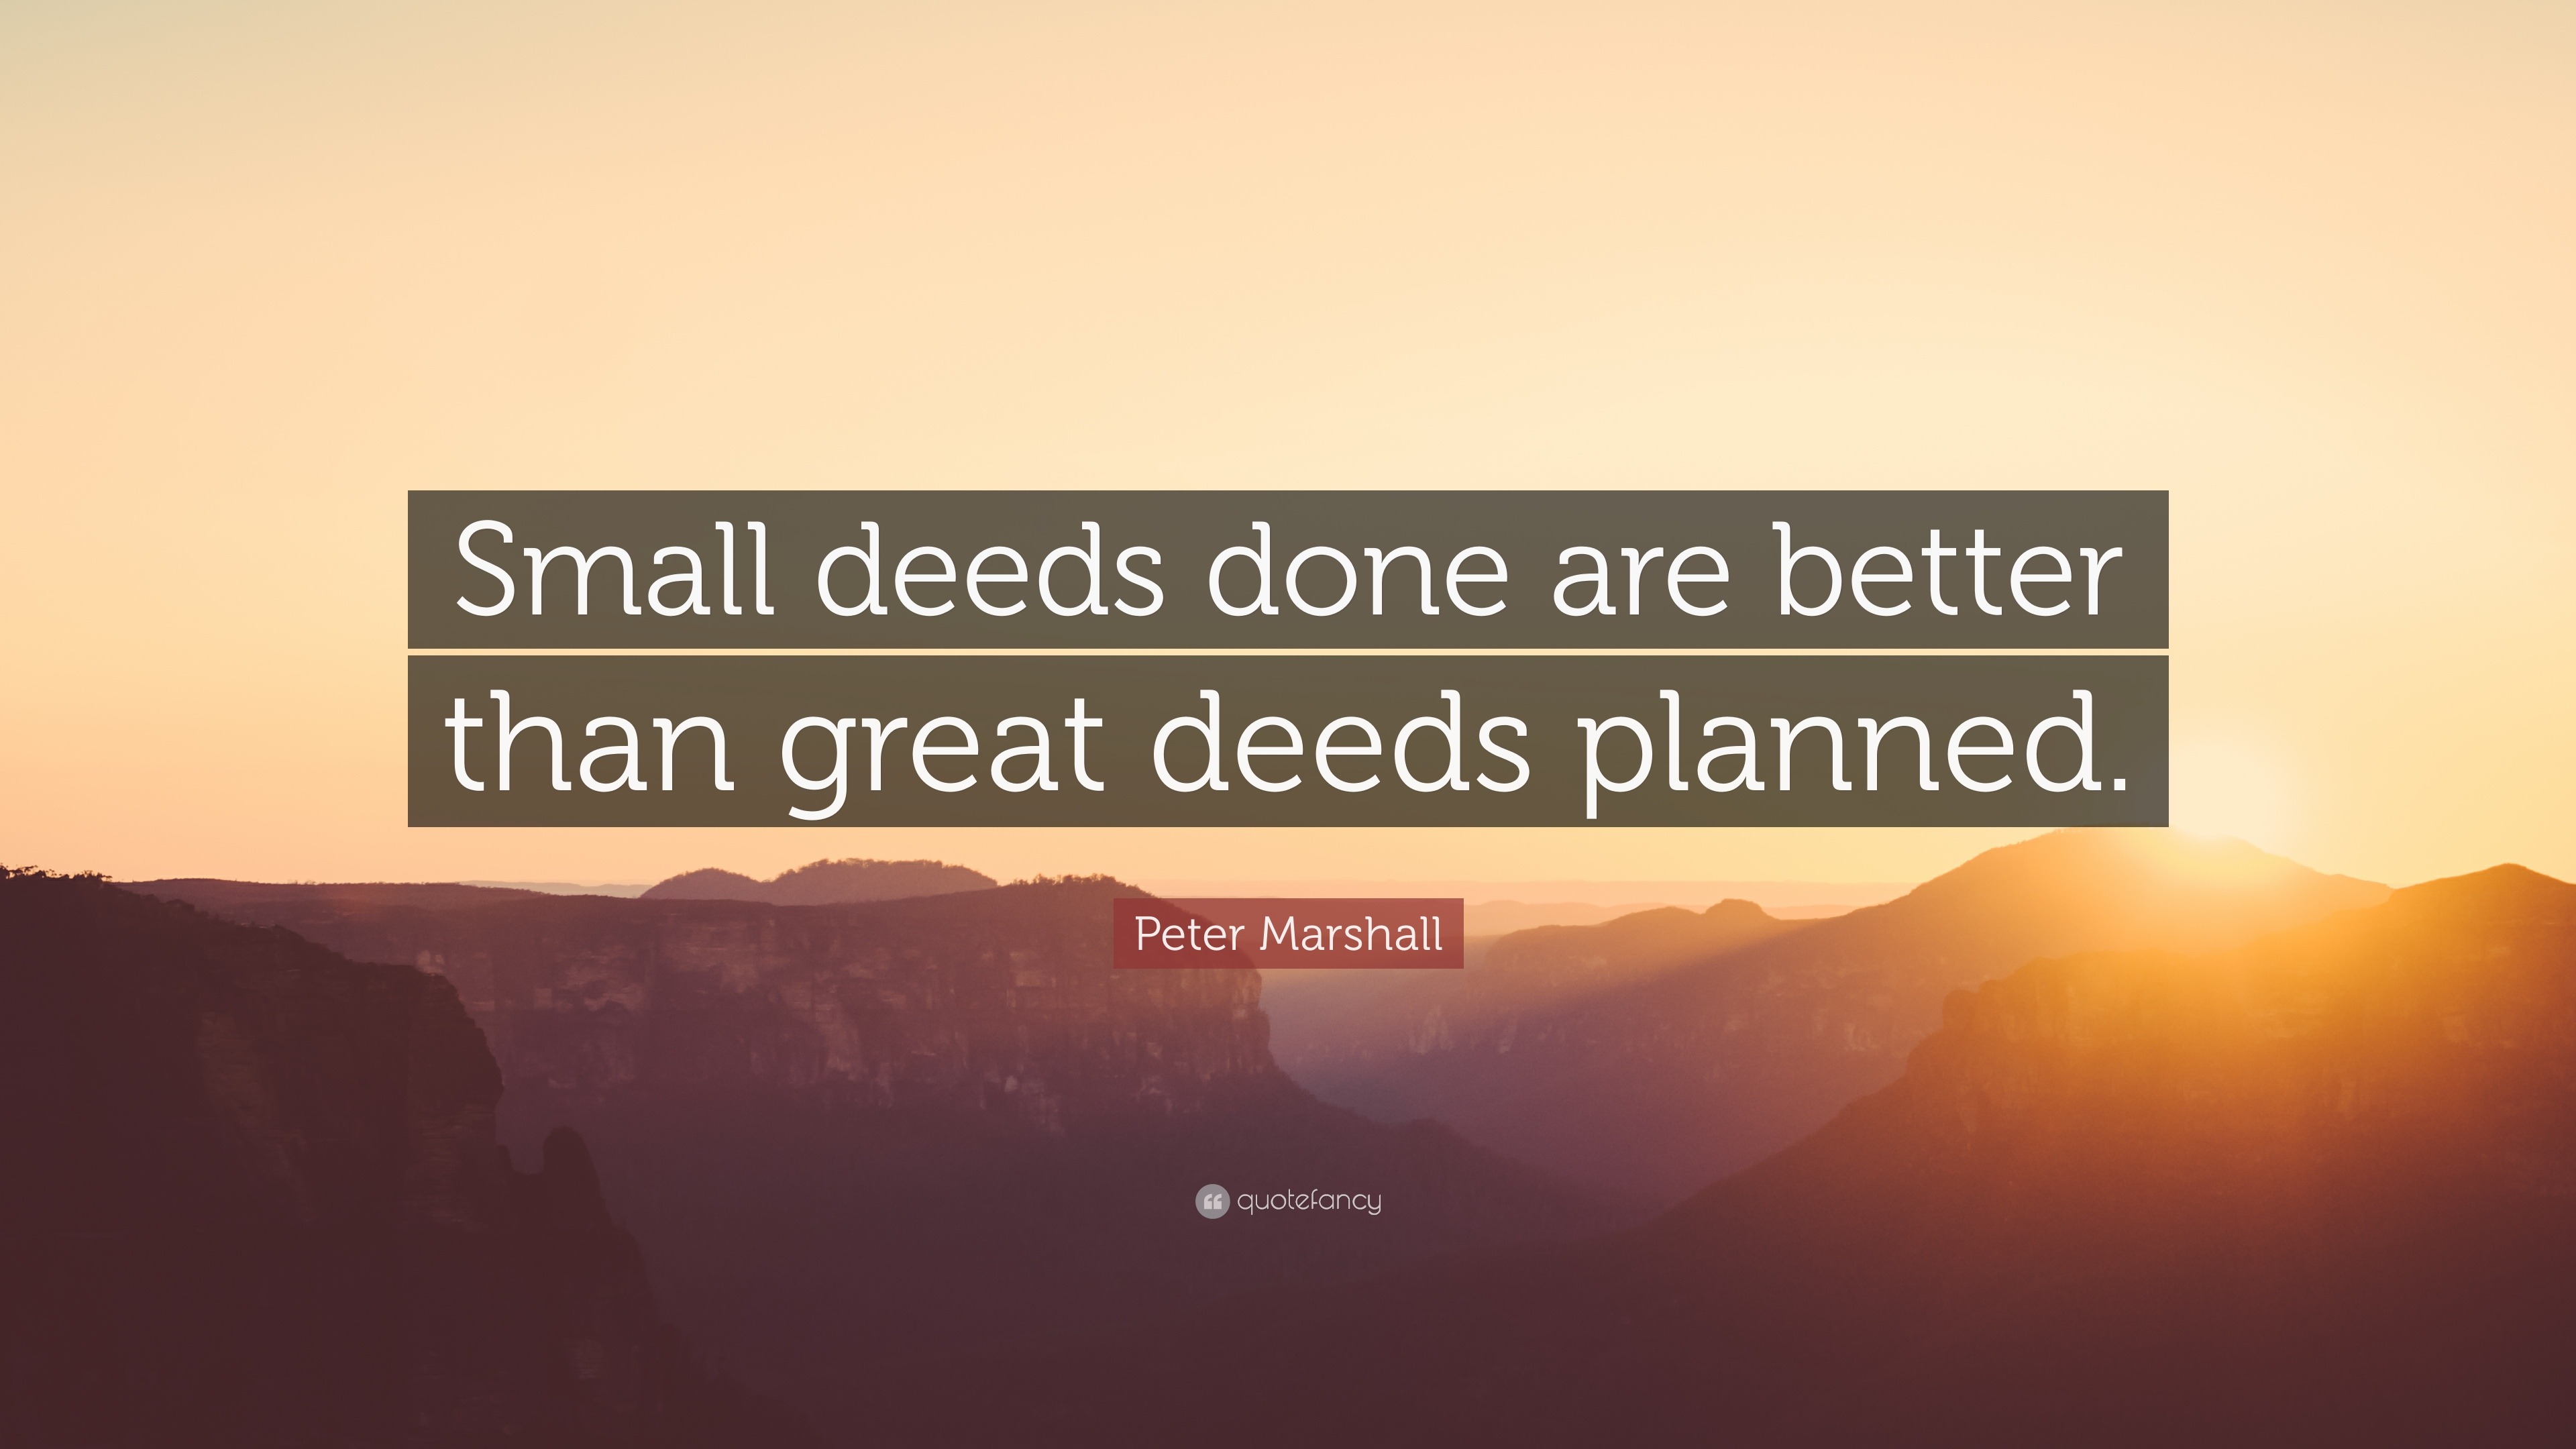 Peter Marshall Quote: “Small deeds done are better than great deeds ...